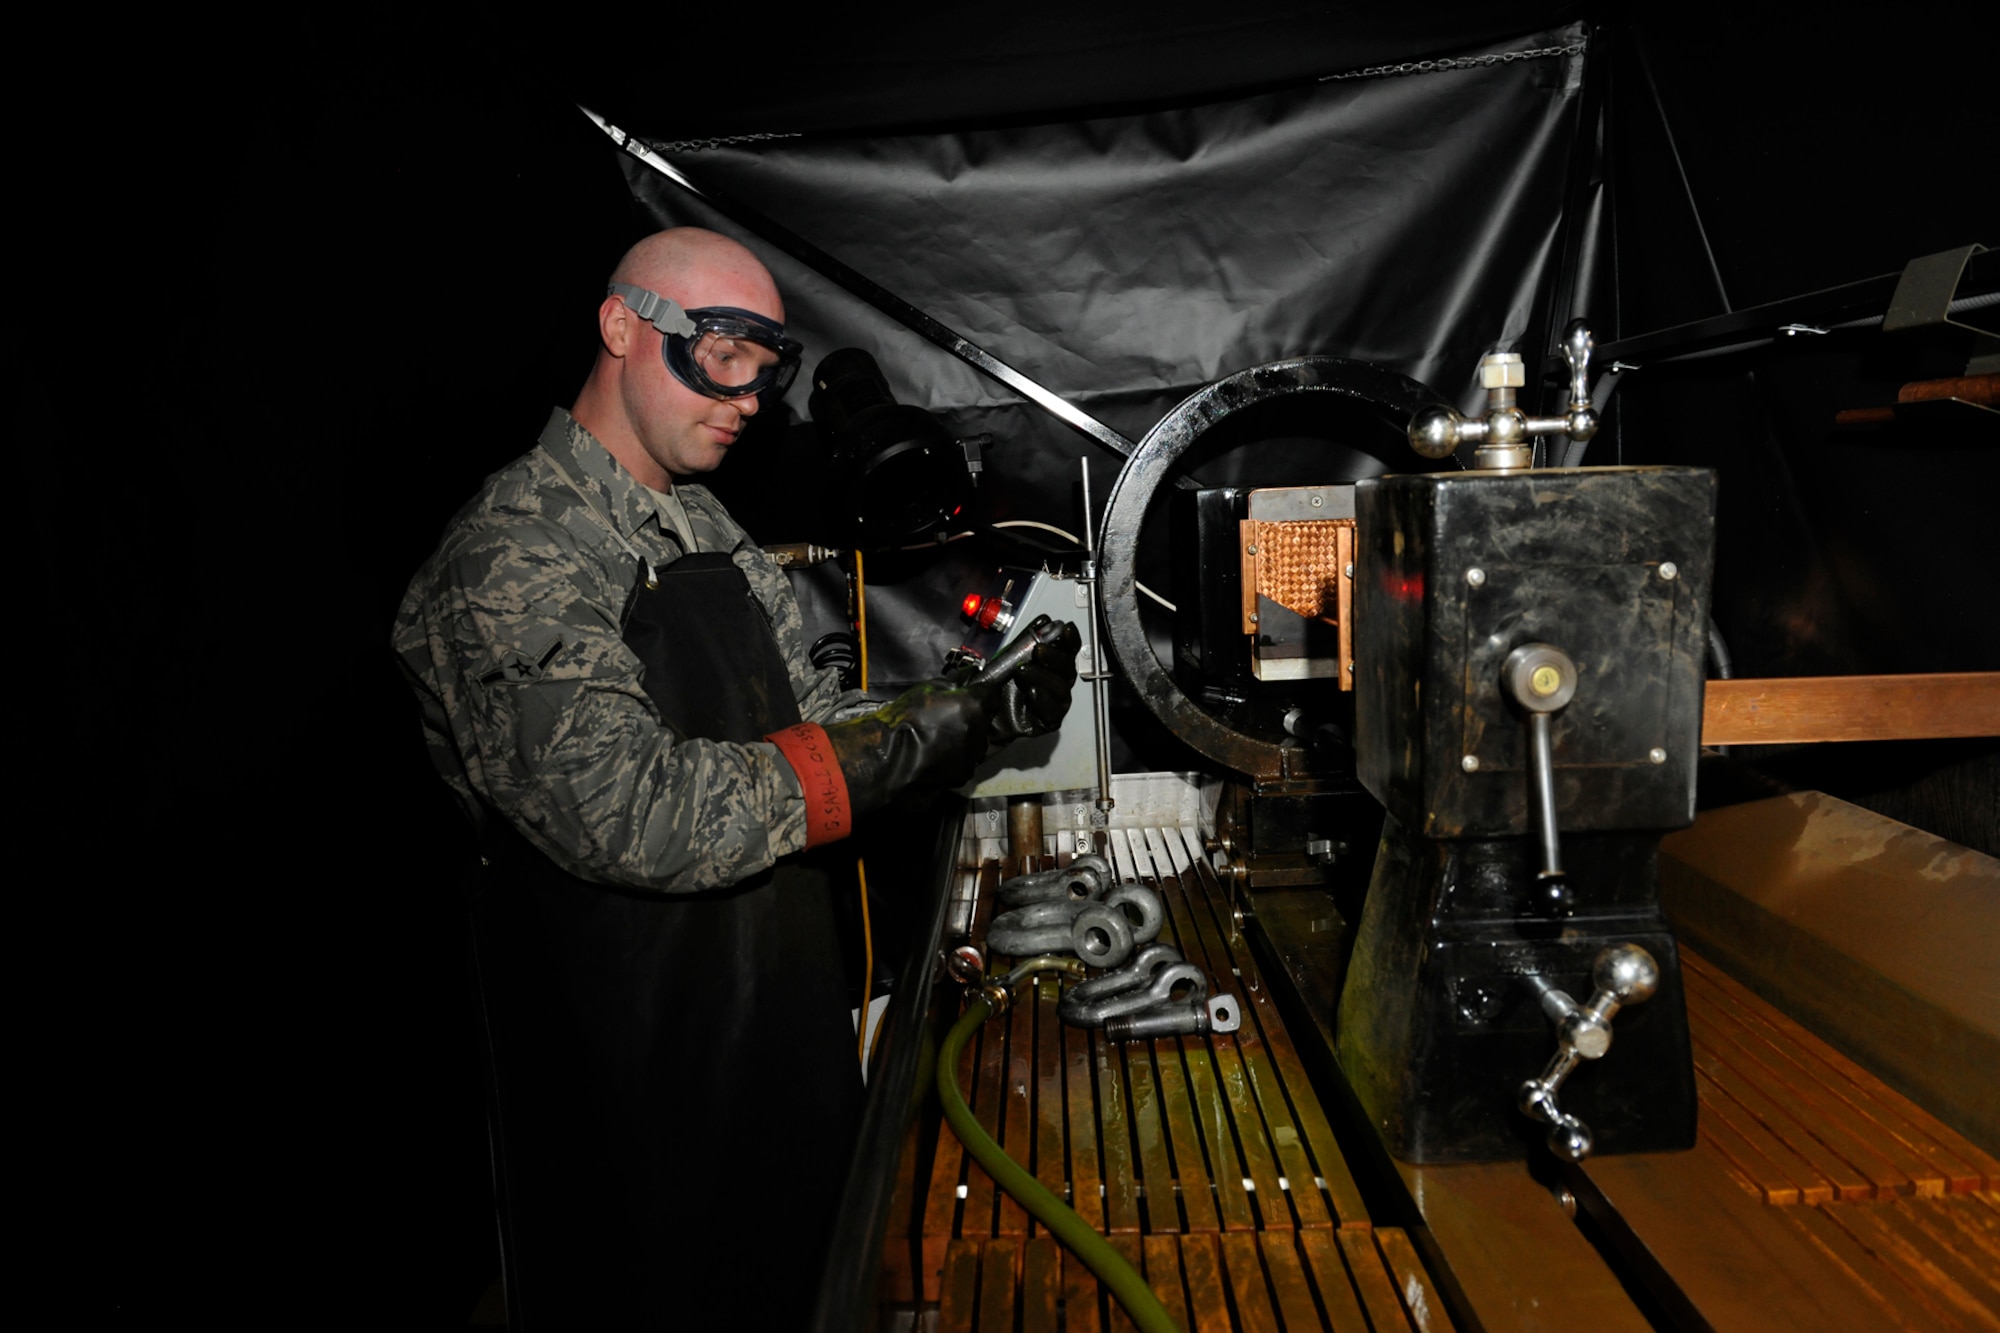 131102-Z-EZ686-128 -- Airman George Sable from 127th Maintenance Squadron conducts Non-Destructive Inspections on aircraft parts for cracks, metal fatigue and stress at Selfridge Air National Guard Base, Mich., Nov. 2, 2013. Sable has served in the 127 MXS for one year. (U.S. Air National Guard photo by MSgt. David Kujawa / Released)